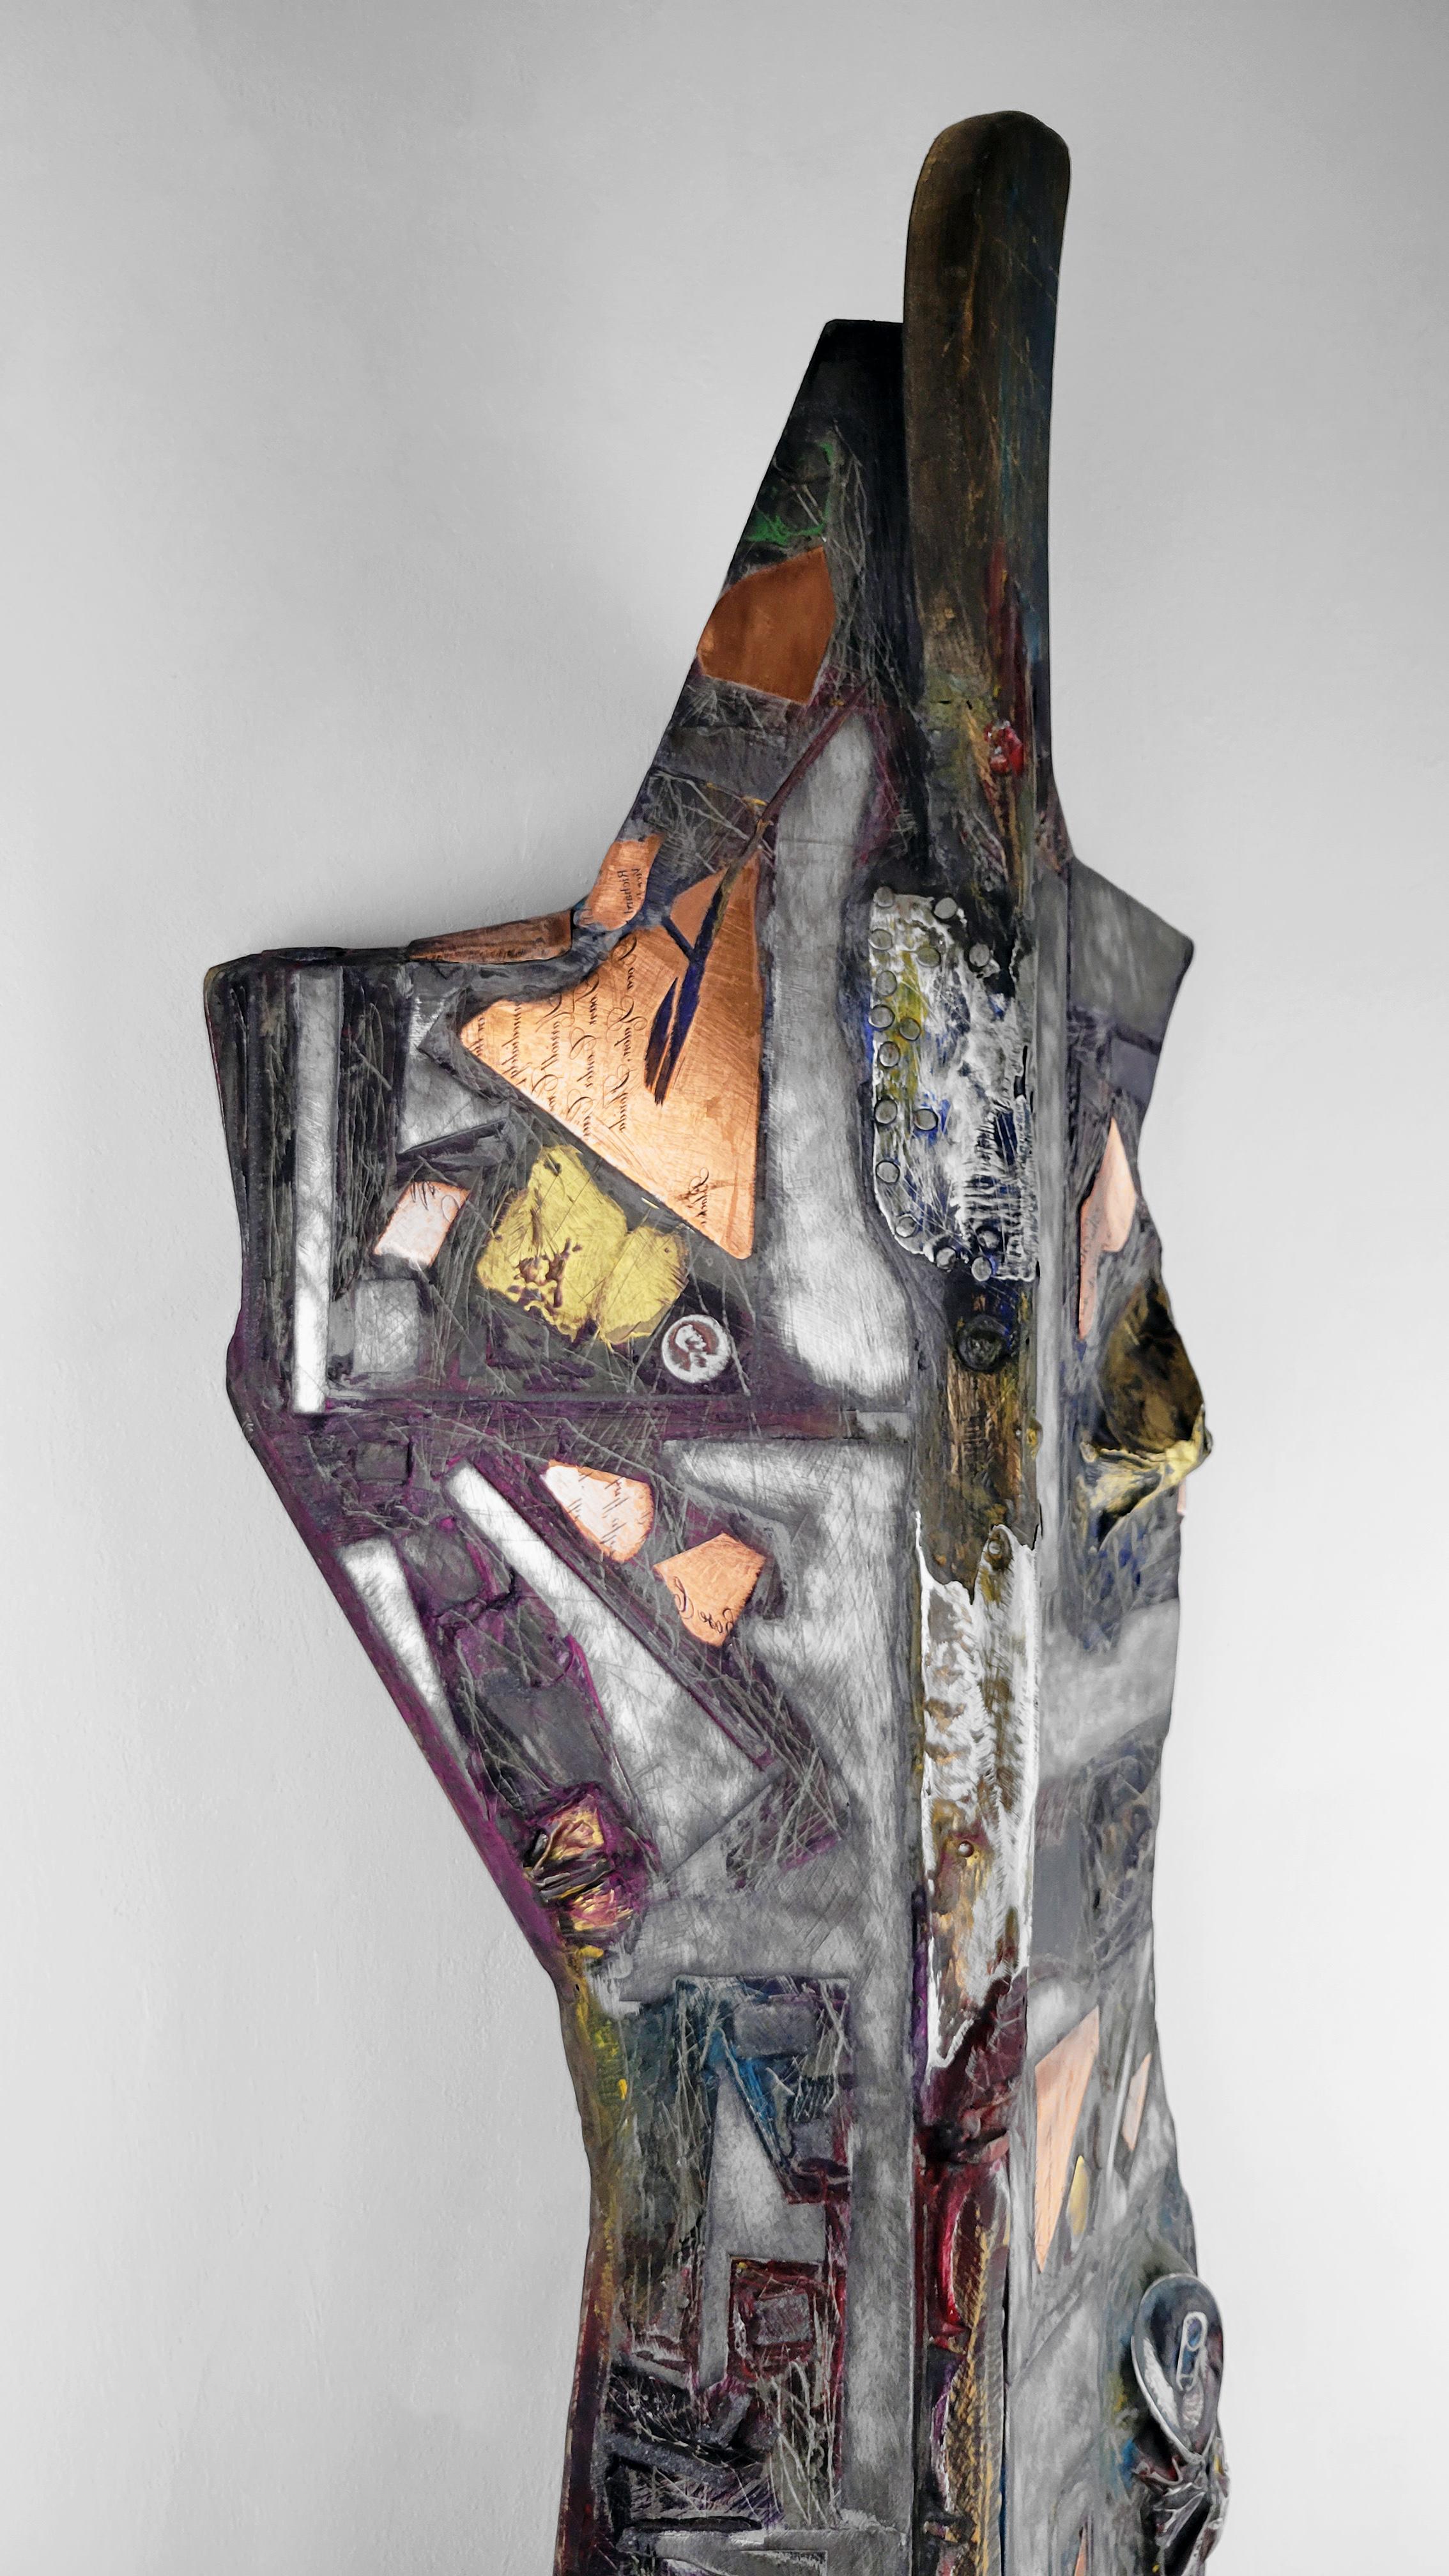 Slow Curve 352 is from Linda Stein’s Knights of Protection series, which are shield-like forms made of mixed media that hang on the wall. They function simultaneously as defenders in battle, symbols of protection and emblems of pacificism.

This